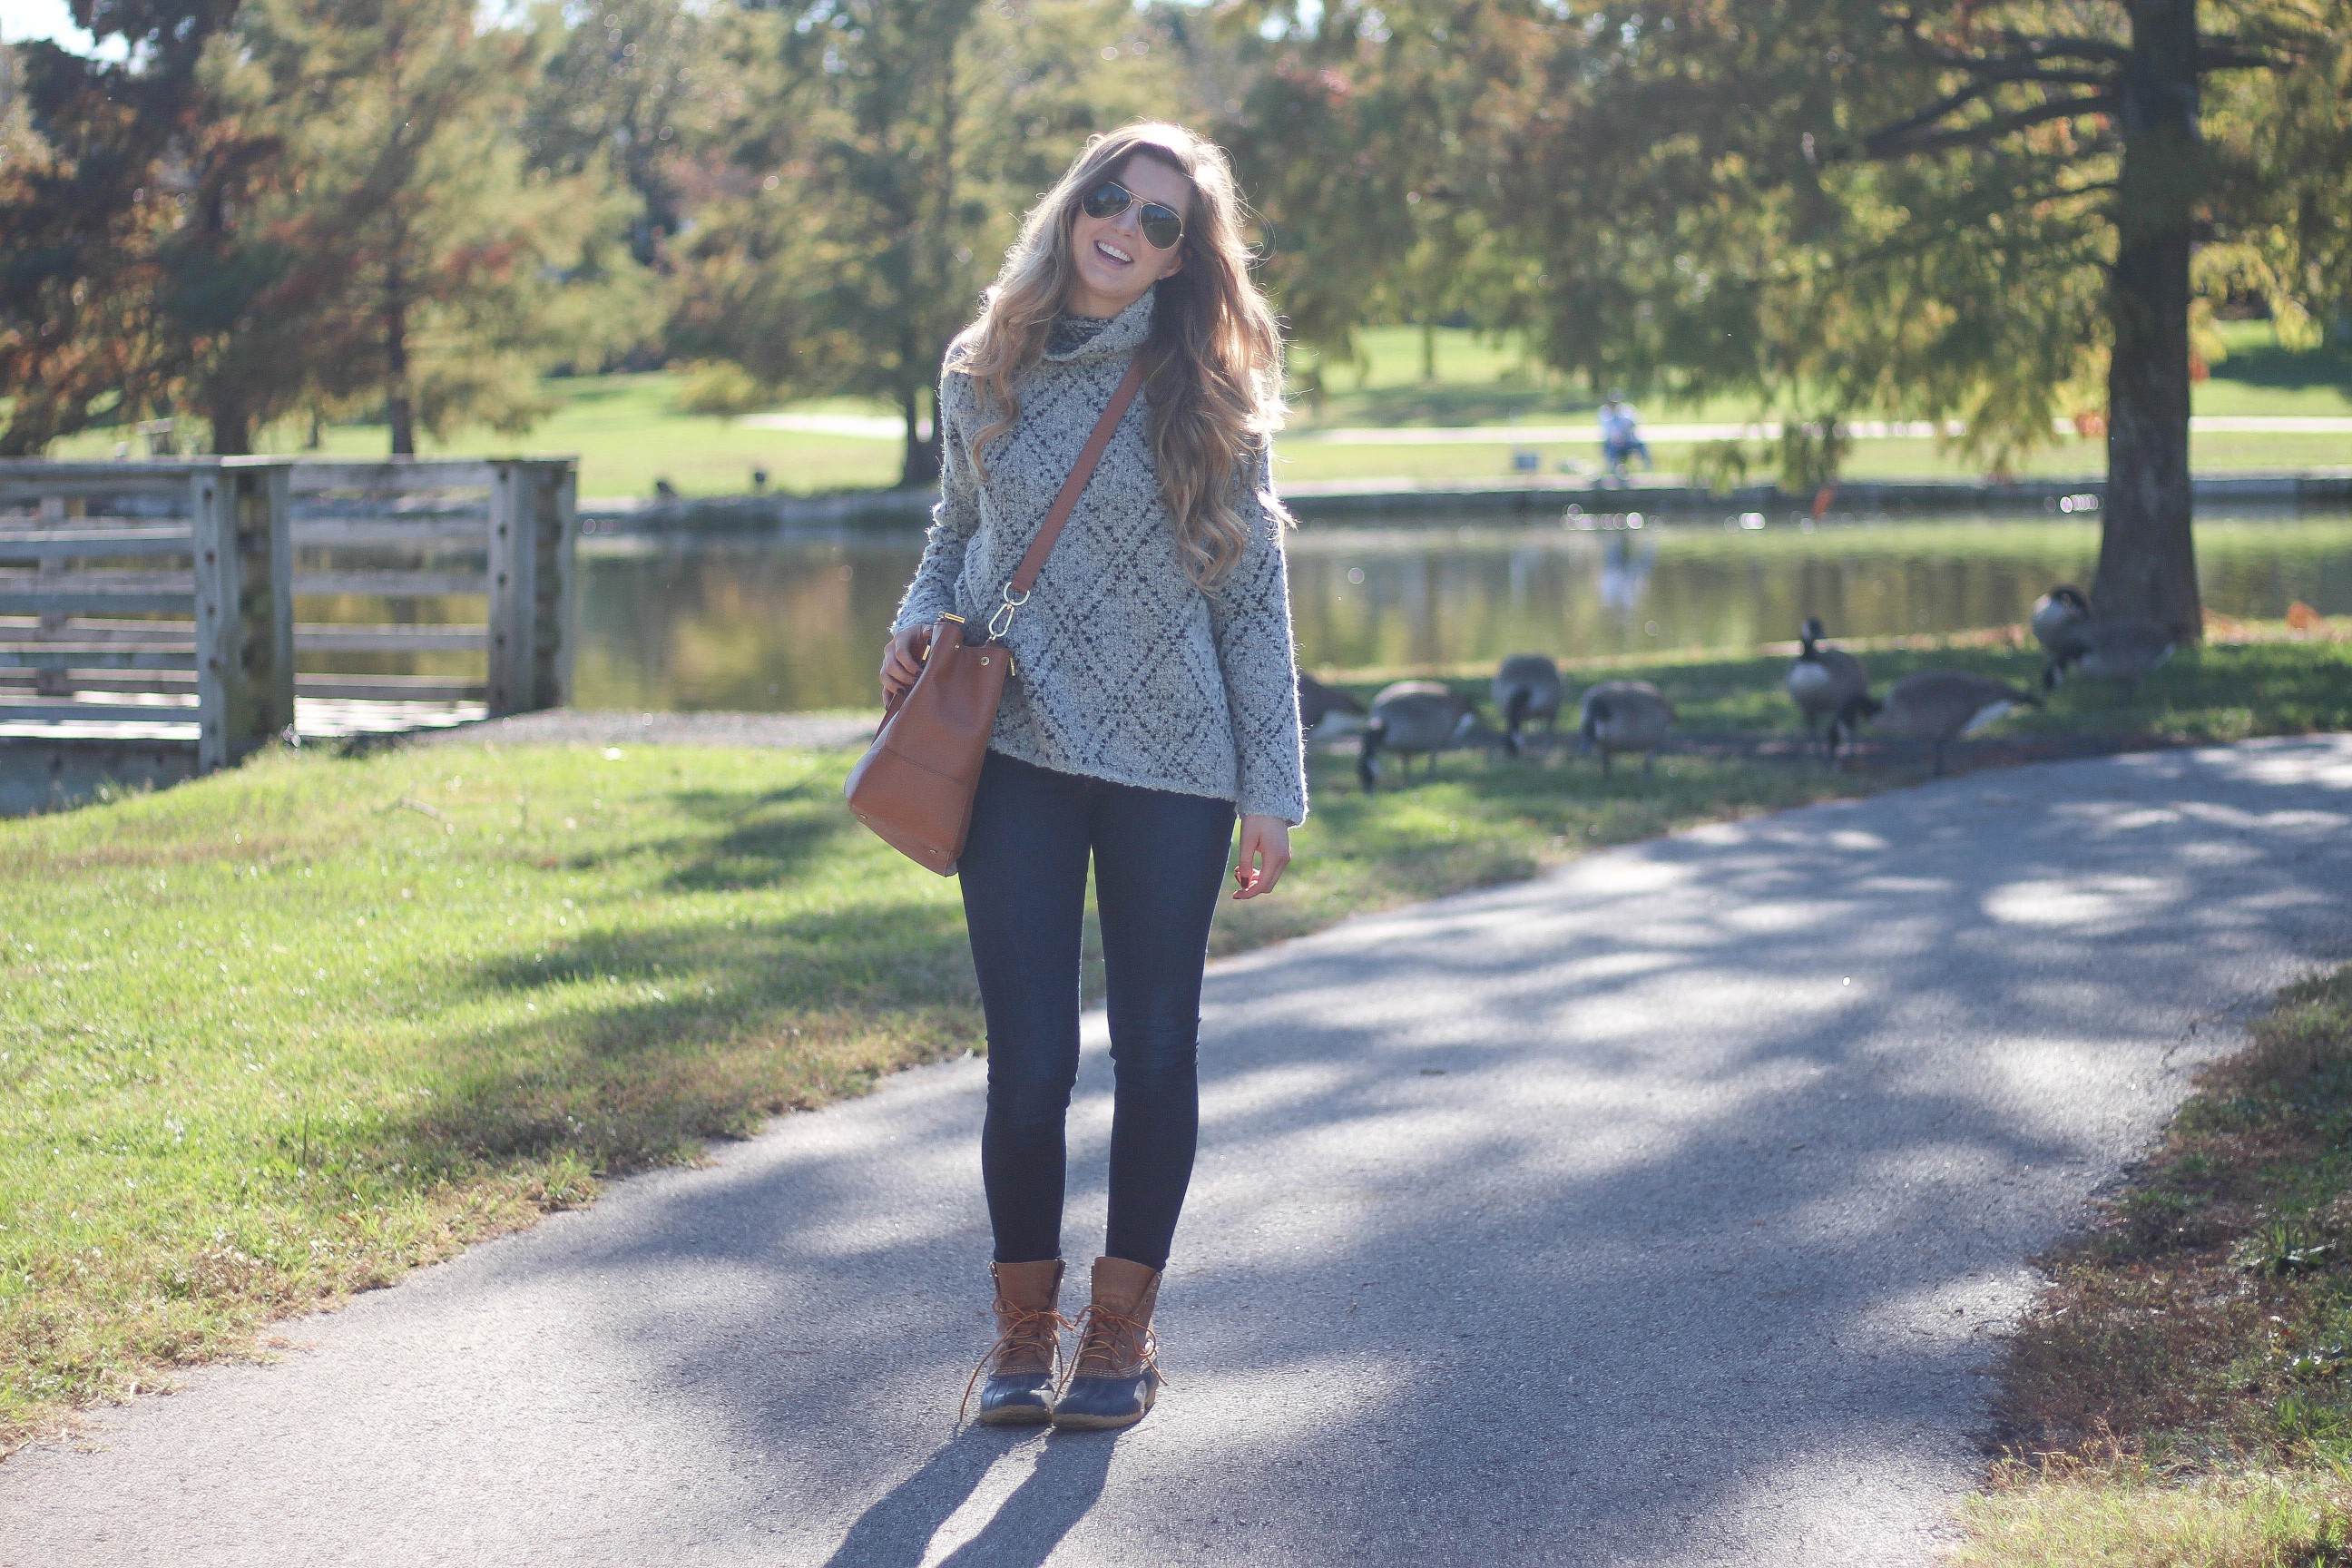 Fall sweater outfit of the day with tory burch tote, ray ban sunglasses, joie sweater, ll bean duck boots, by lauren landmark on daily dose of charm dailydoseofcharm.com (ALL DETAILS ON THE BLOG)